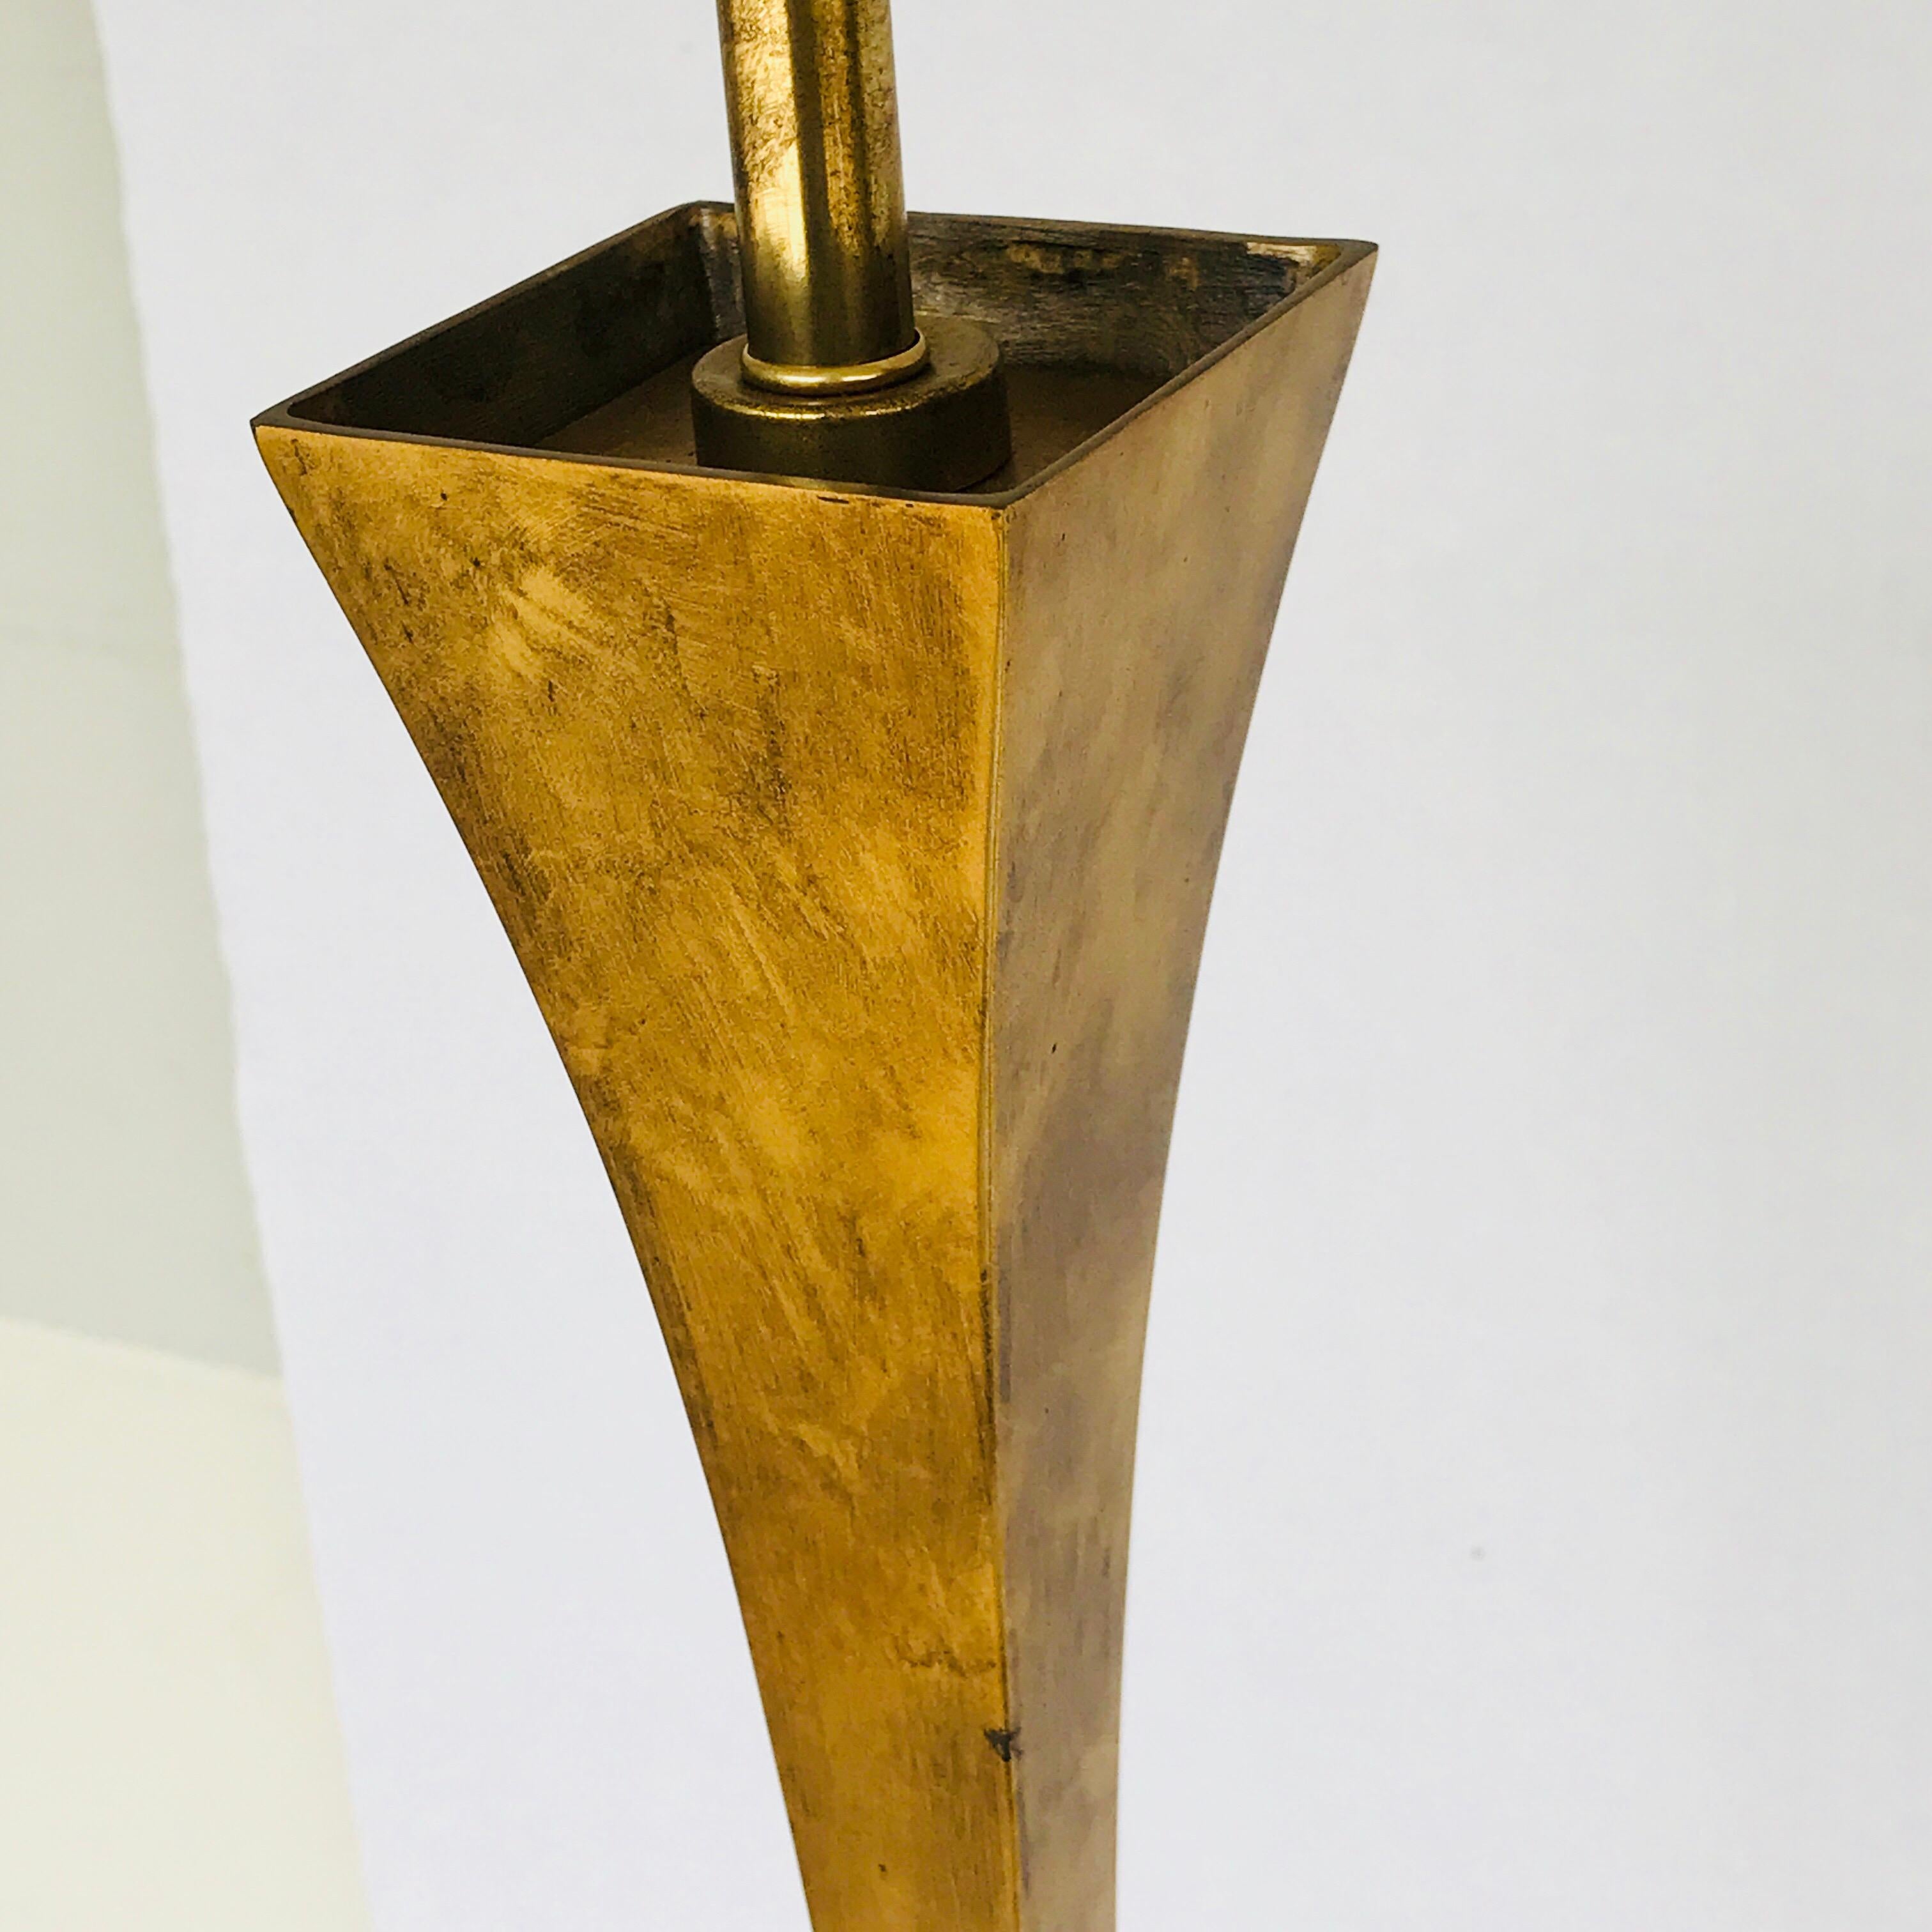 Patinated Mid-Century Modern Acid Washed Bronze Floor Lamp by Stewart Ross for Hansen For Sale